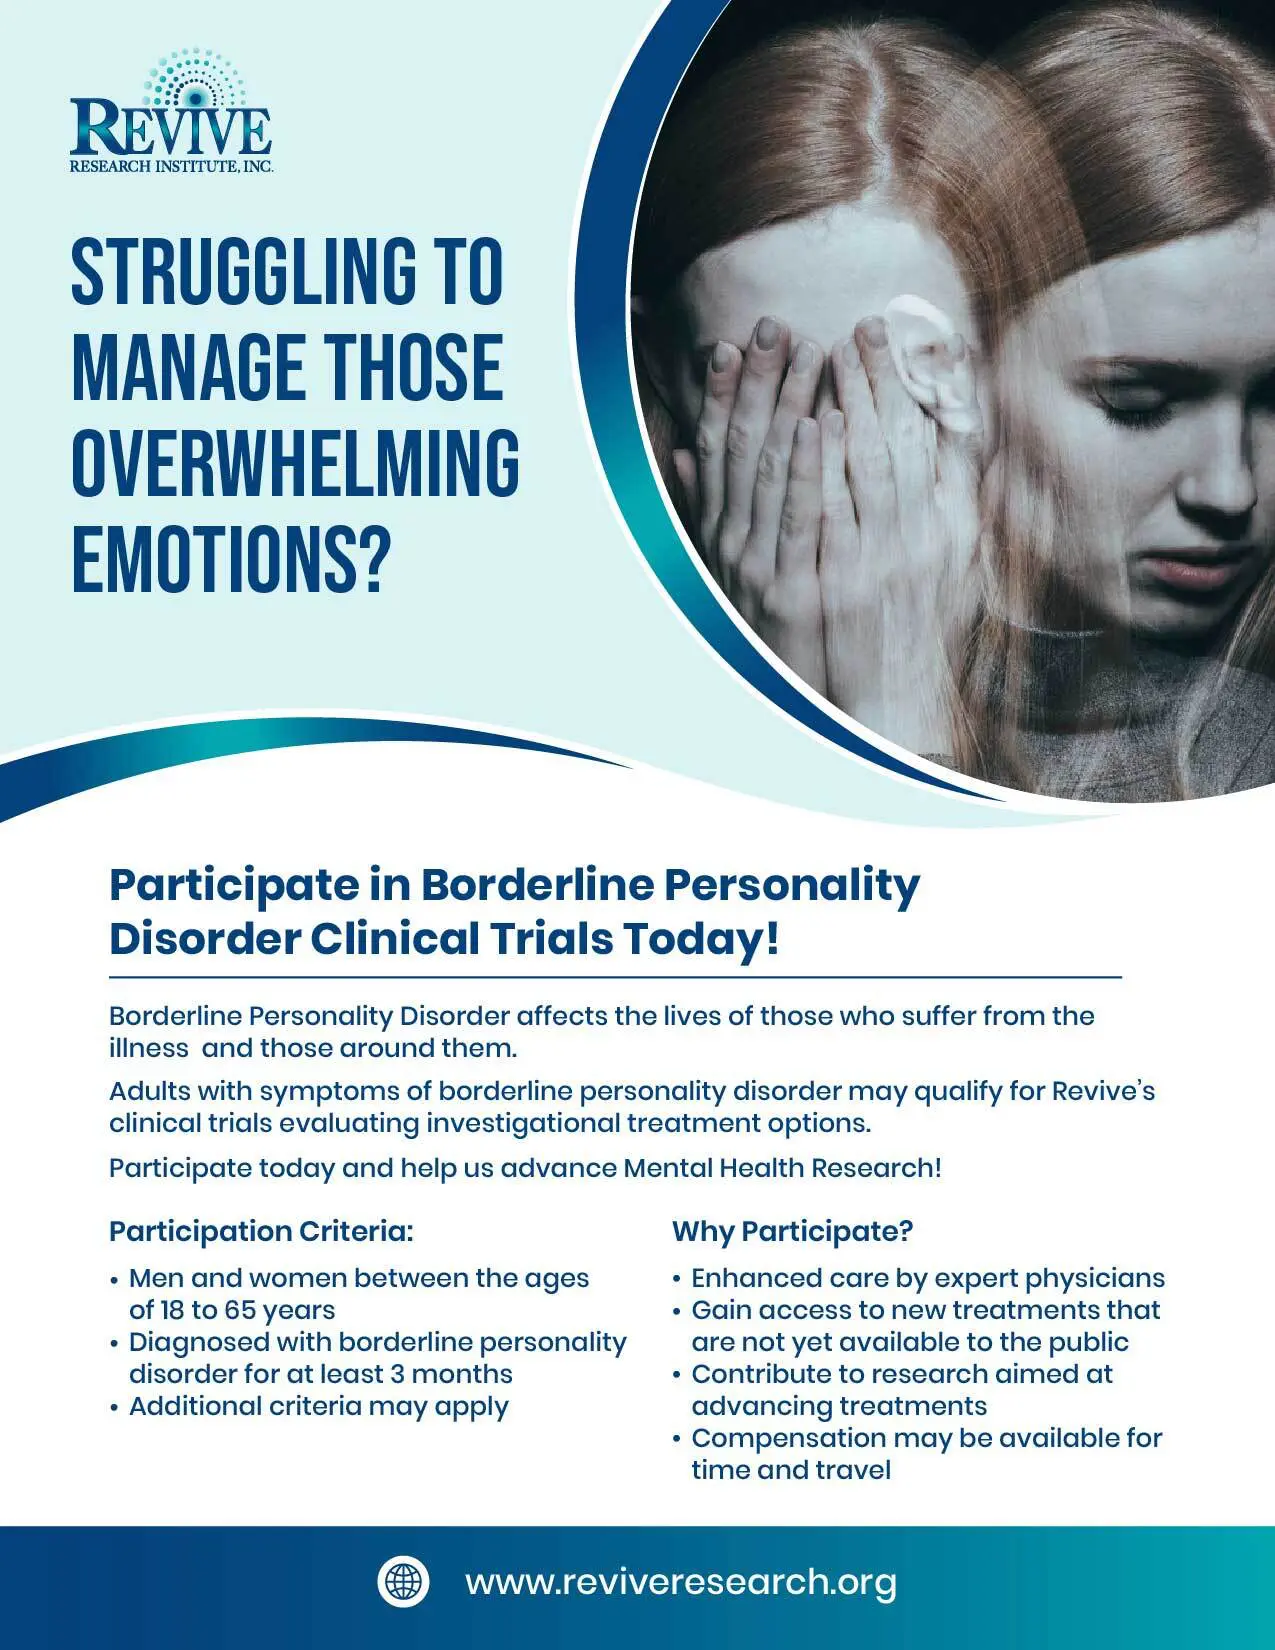 New Research Explores The Nuances Of Borderline Personality Disorder